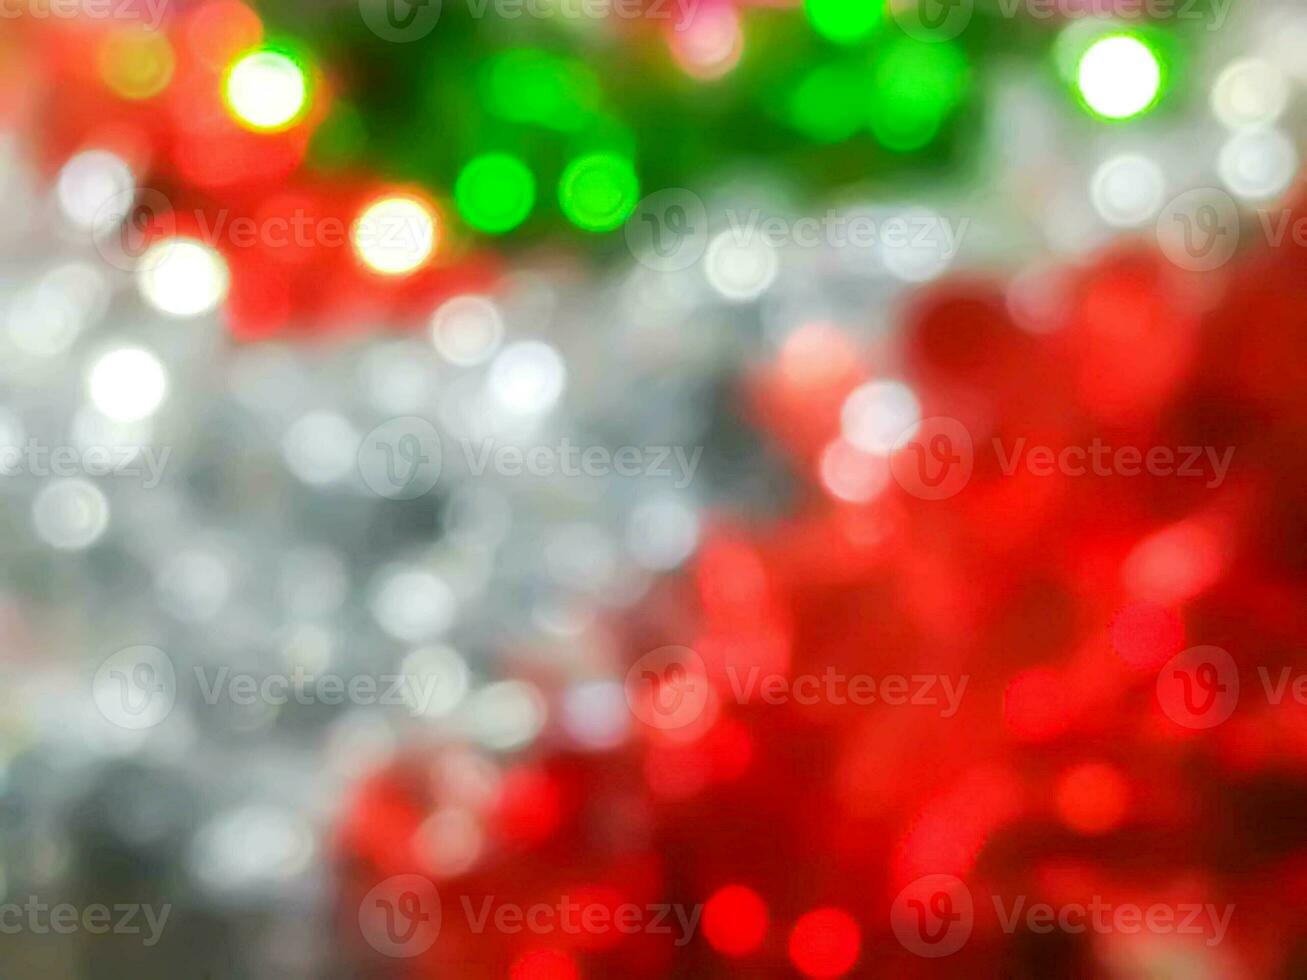 Blurred and bokeh red, green and white reflection of Christmas decorated background and wallpaper. photo